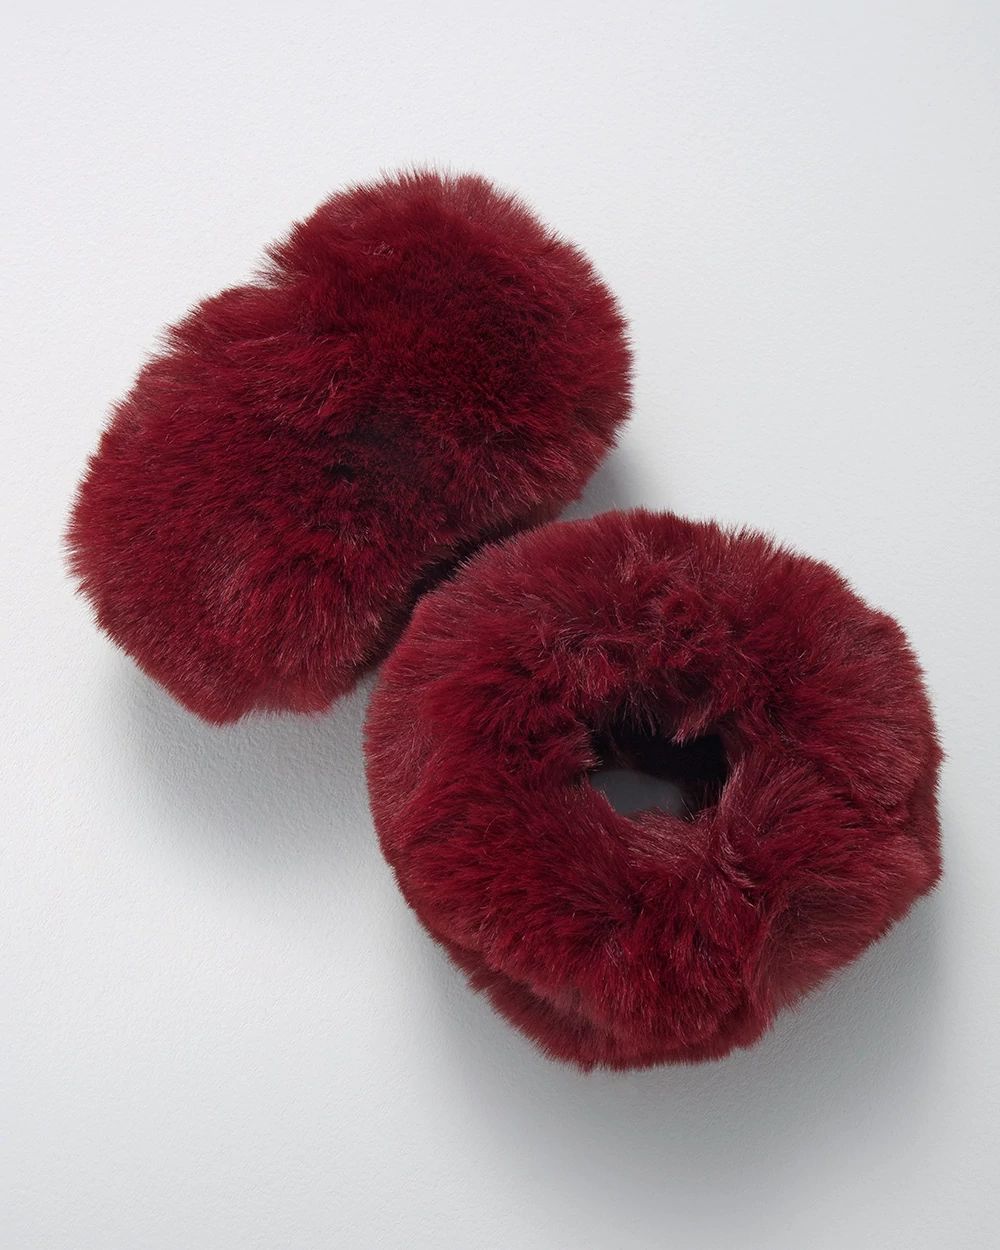 Faux Fur Cuffs click to view larger image.